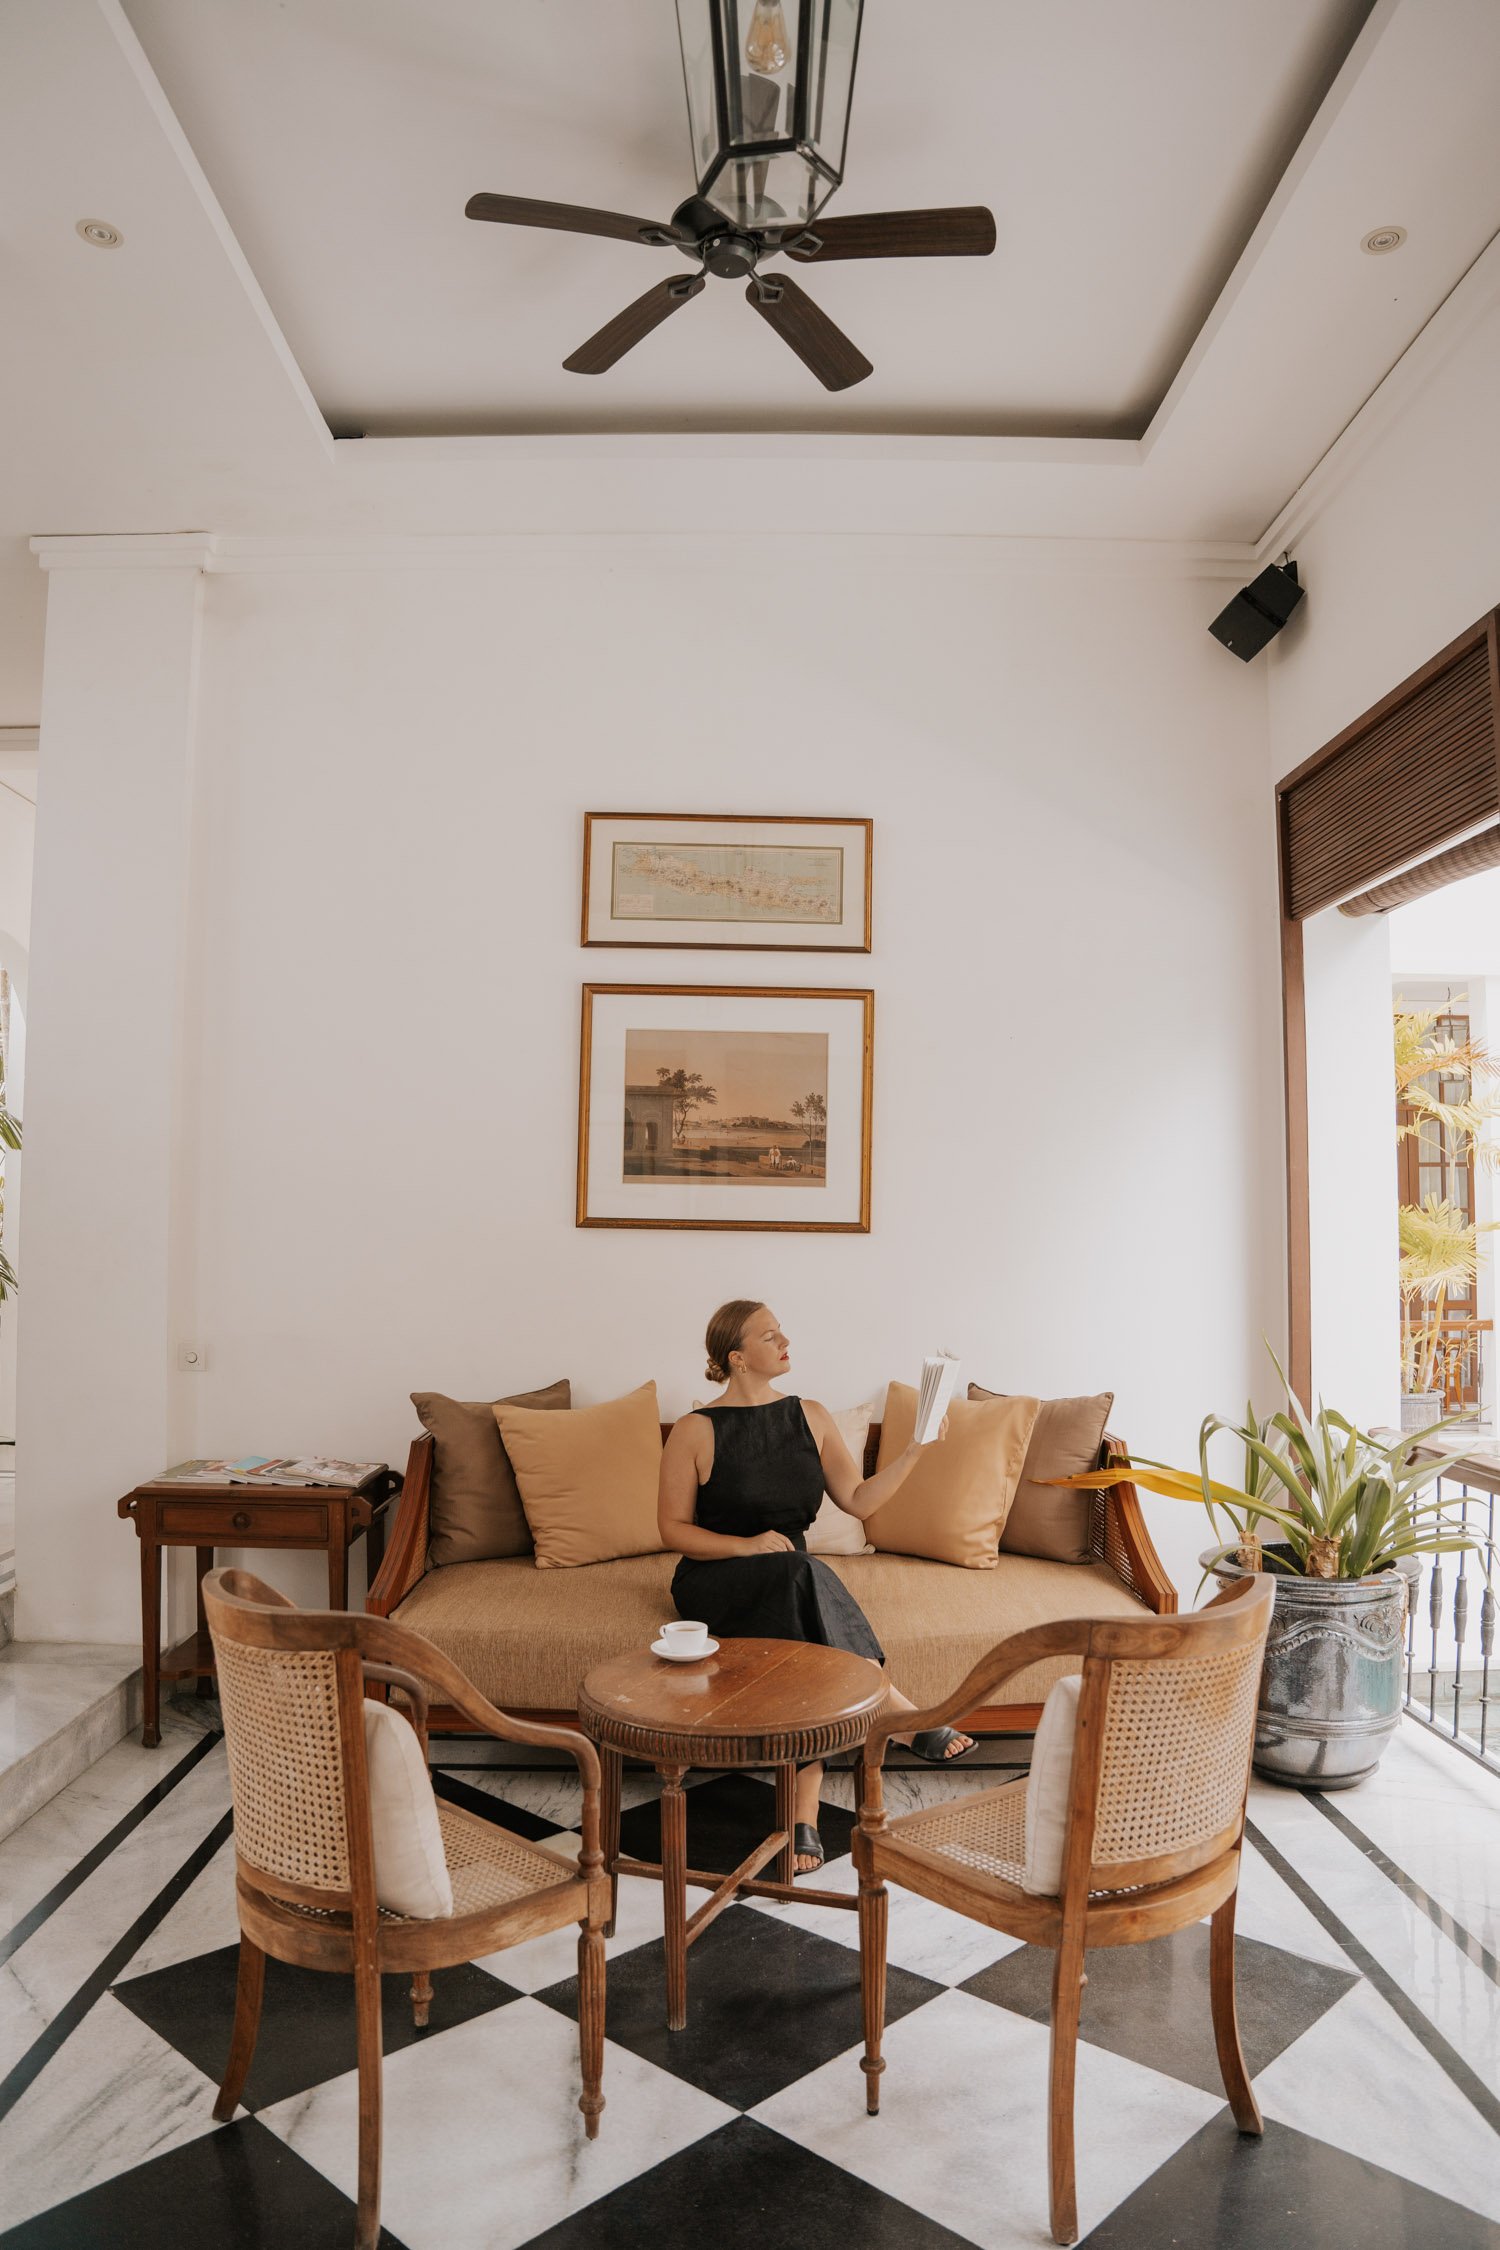 The Colony Hotel Most instagrammable hotels in bali